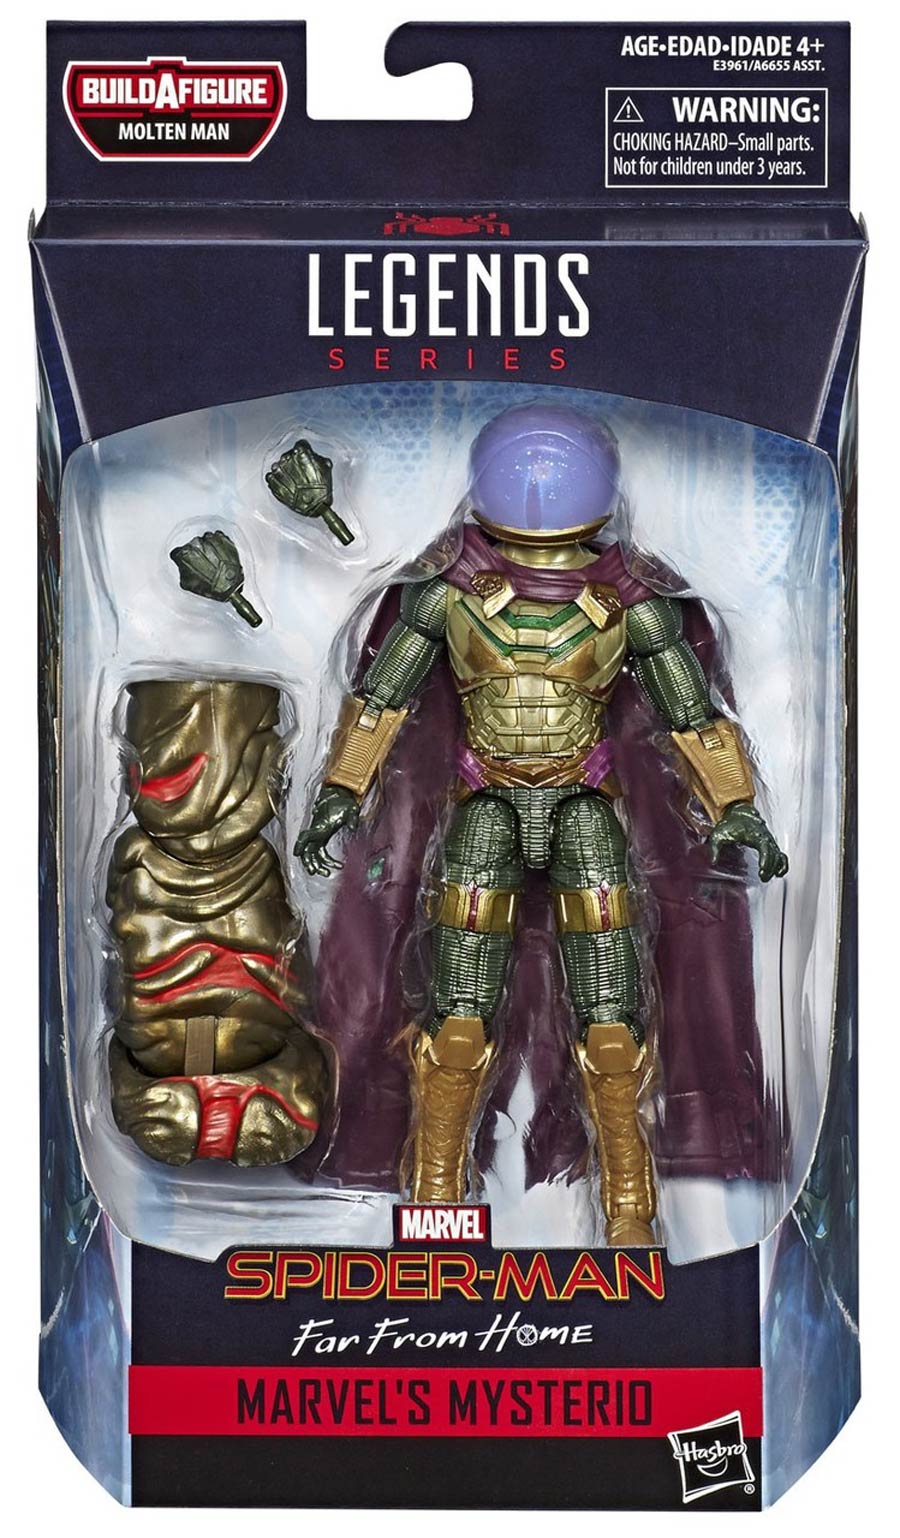 Spider-Man Far From Home Legends 2019 6-Inch Action Figure - Mysterio